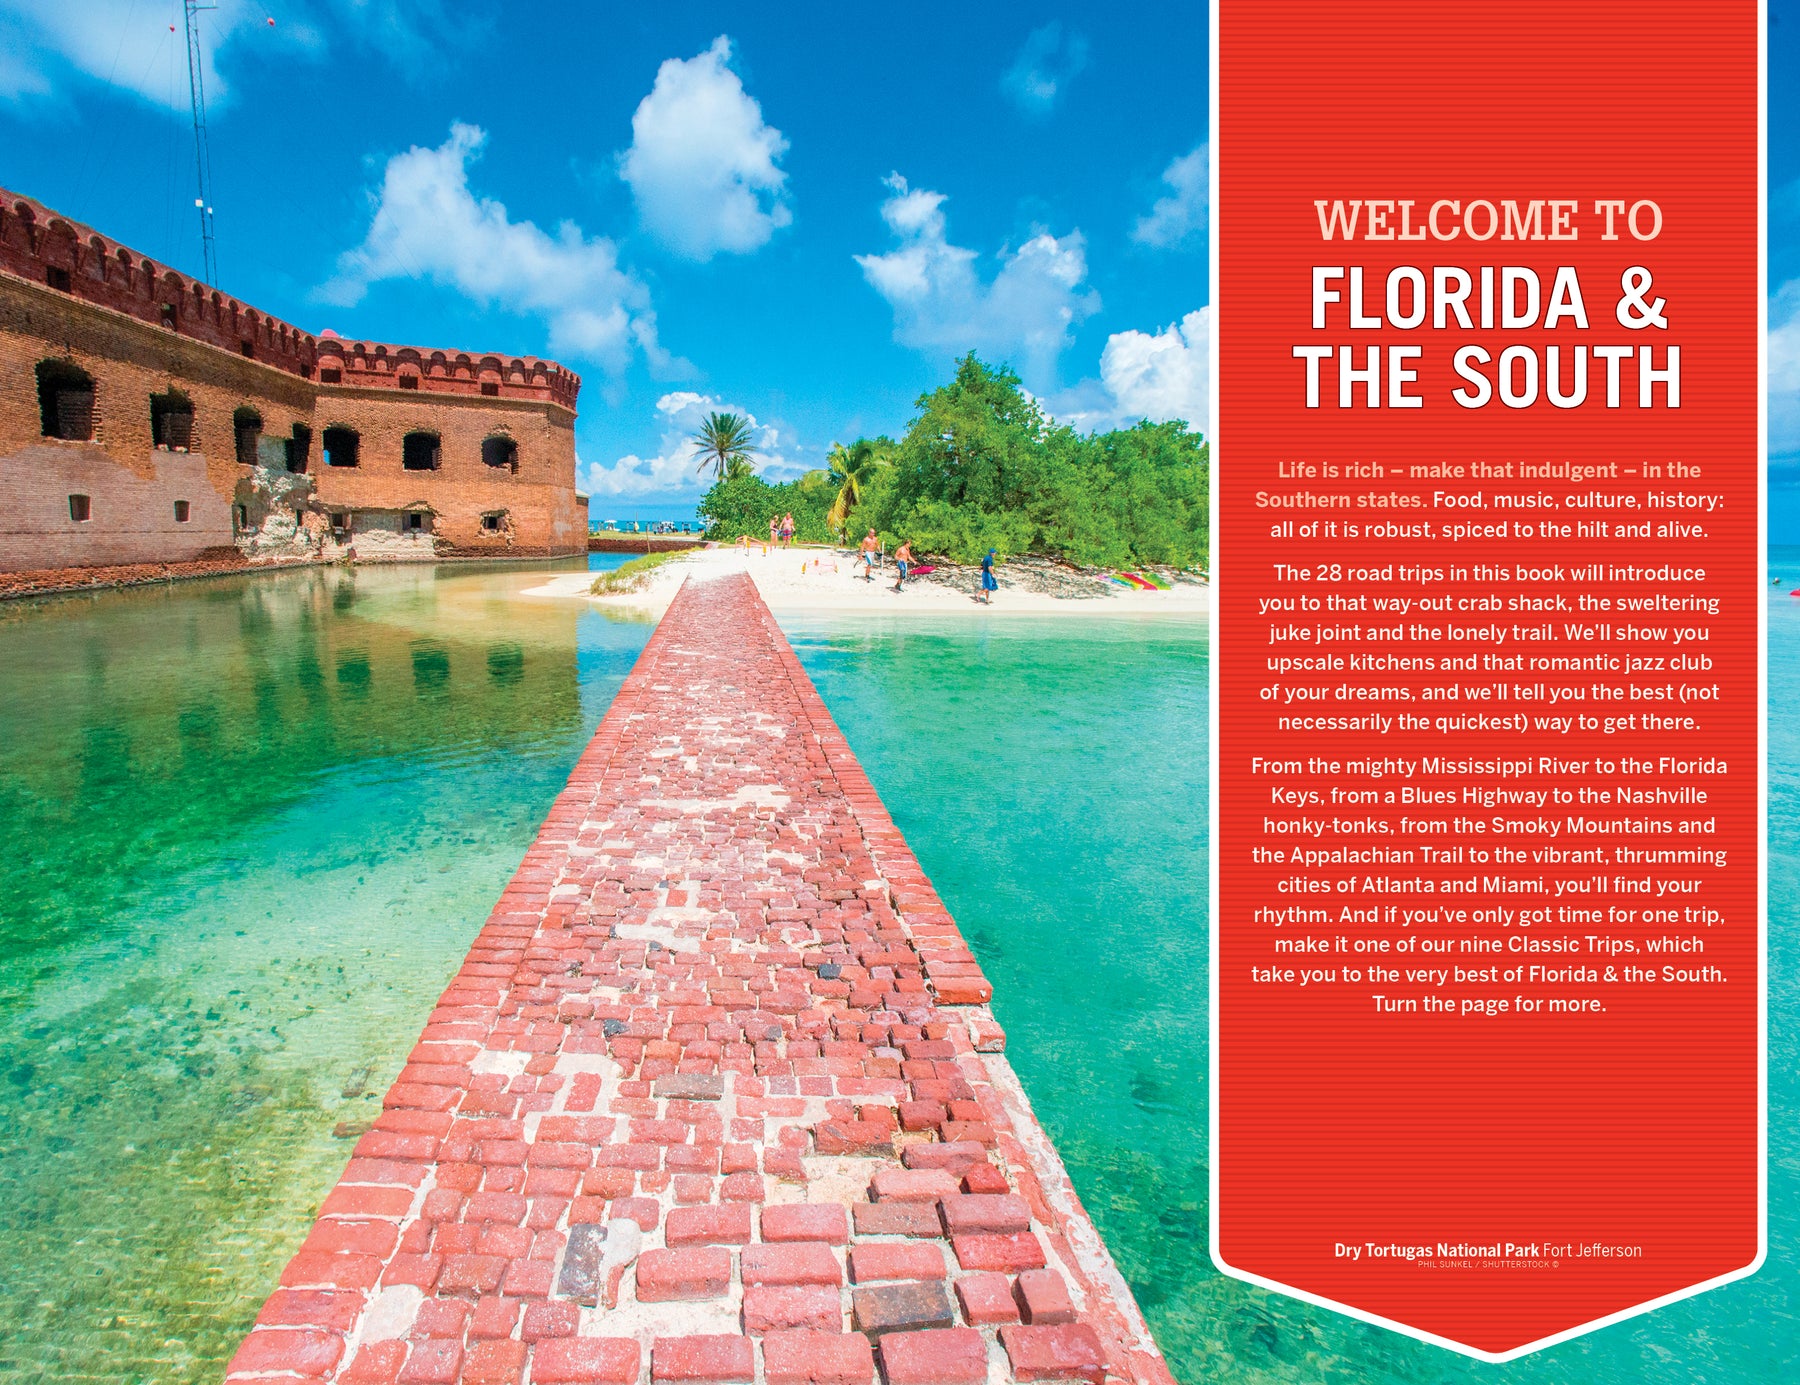 Florida & the South's Best Trips preview